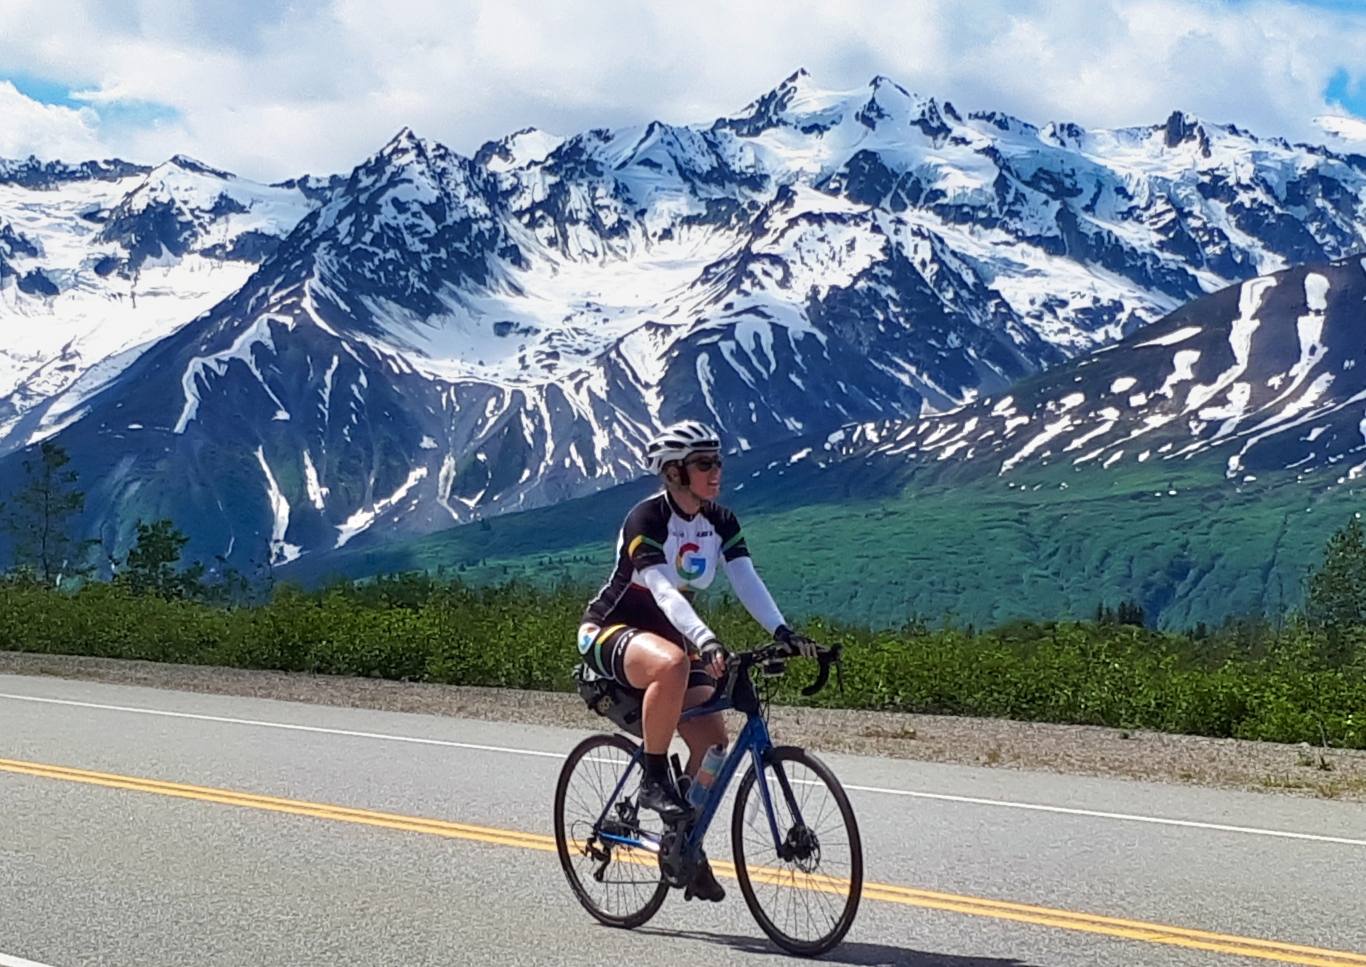 Bicyclist passing snow capped mountains